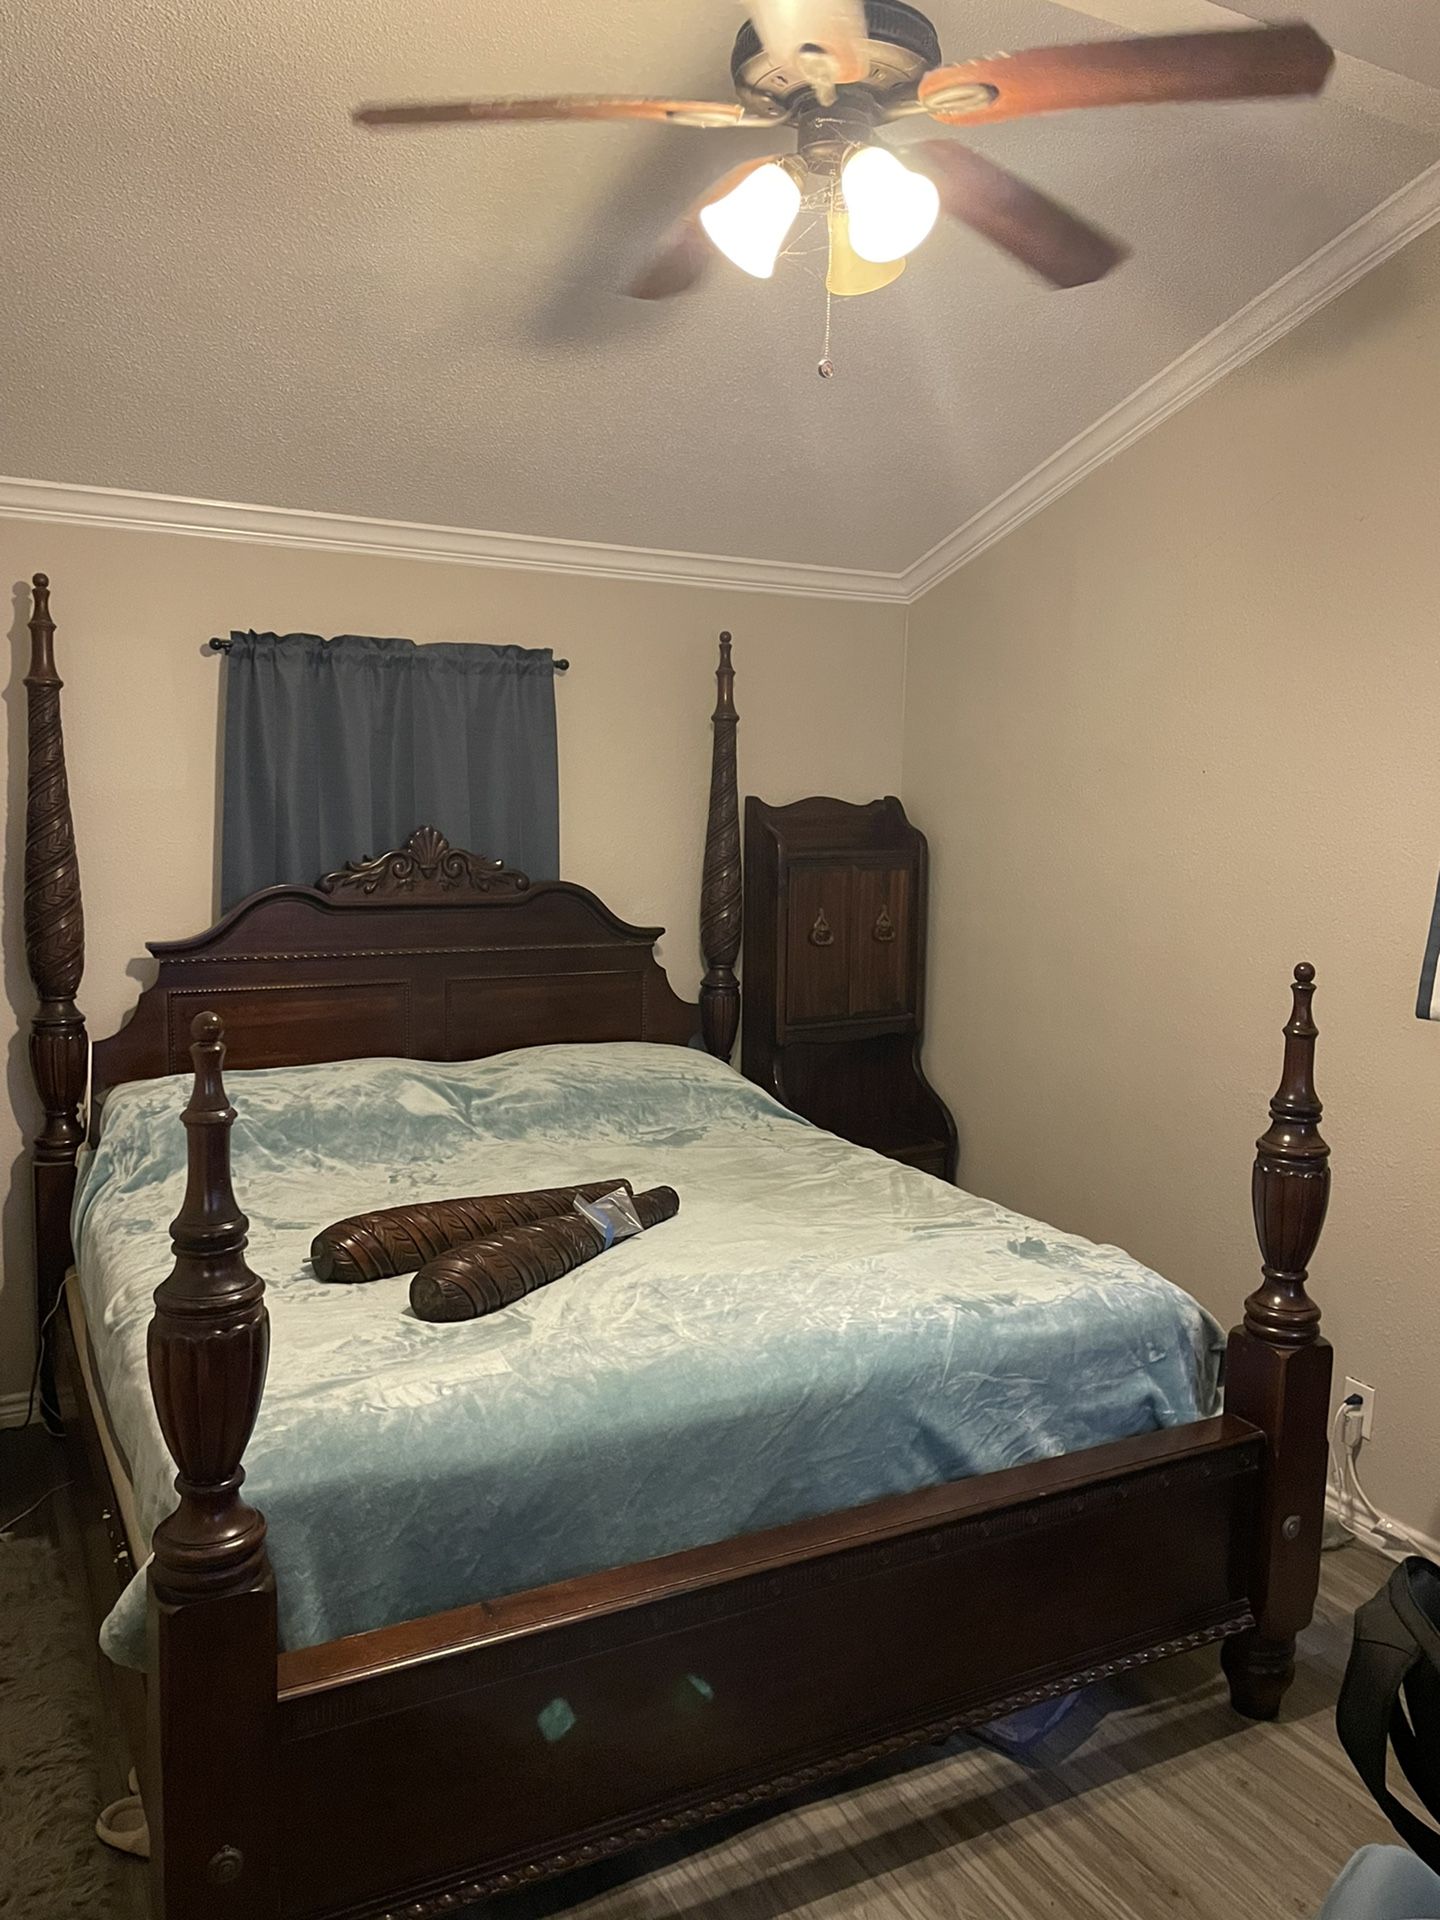 King Size Bed And Nightstands    Mattress Not Included